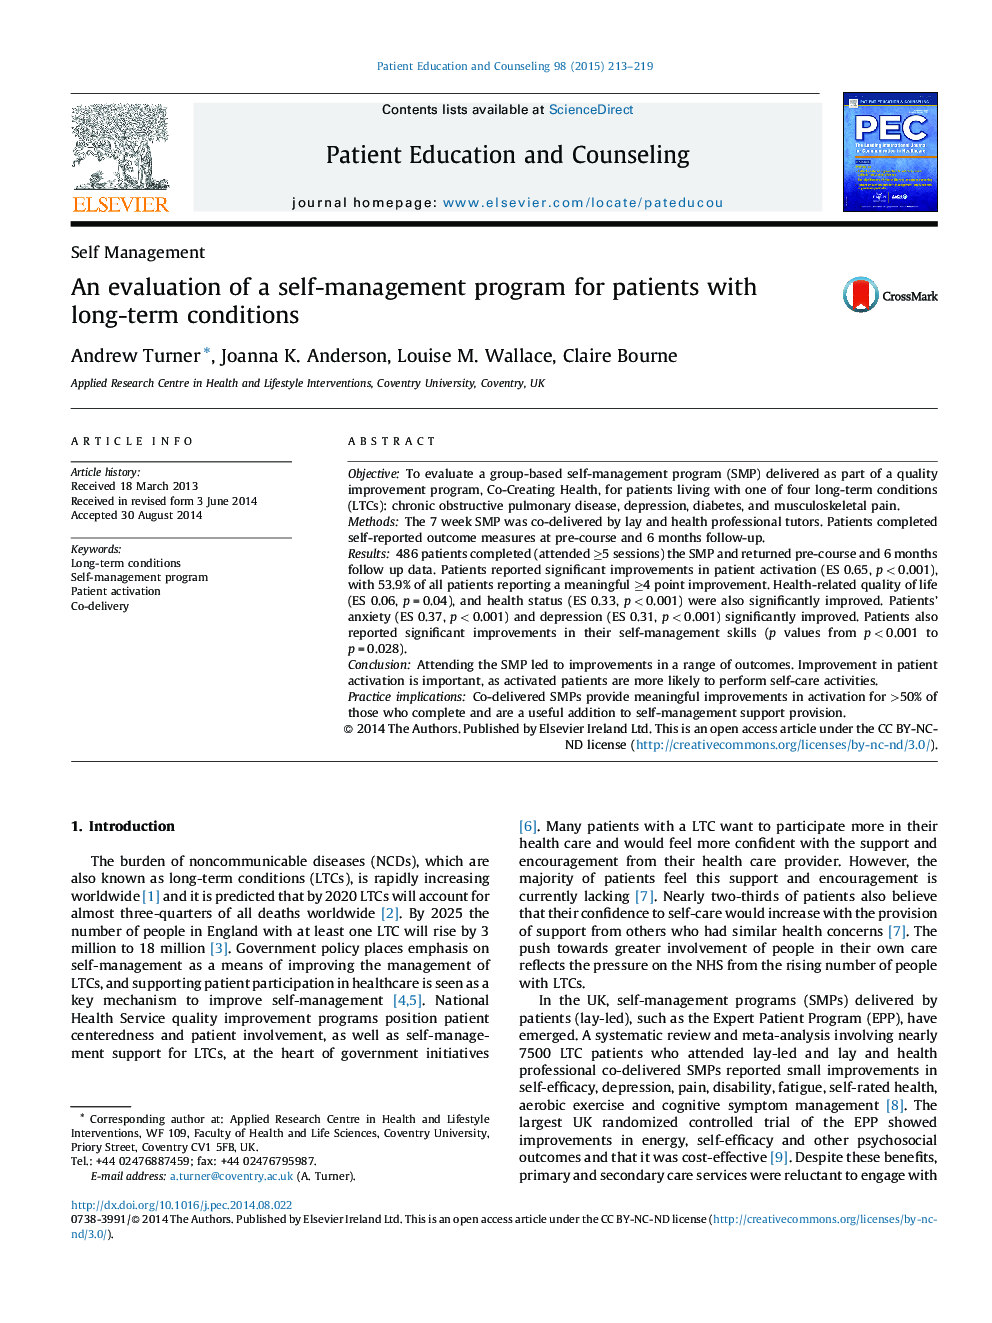 An evaluation of a self-management program for patients with long-term conditions